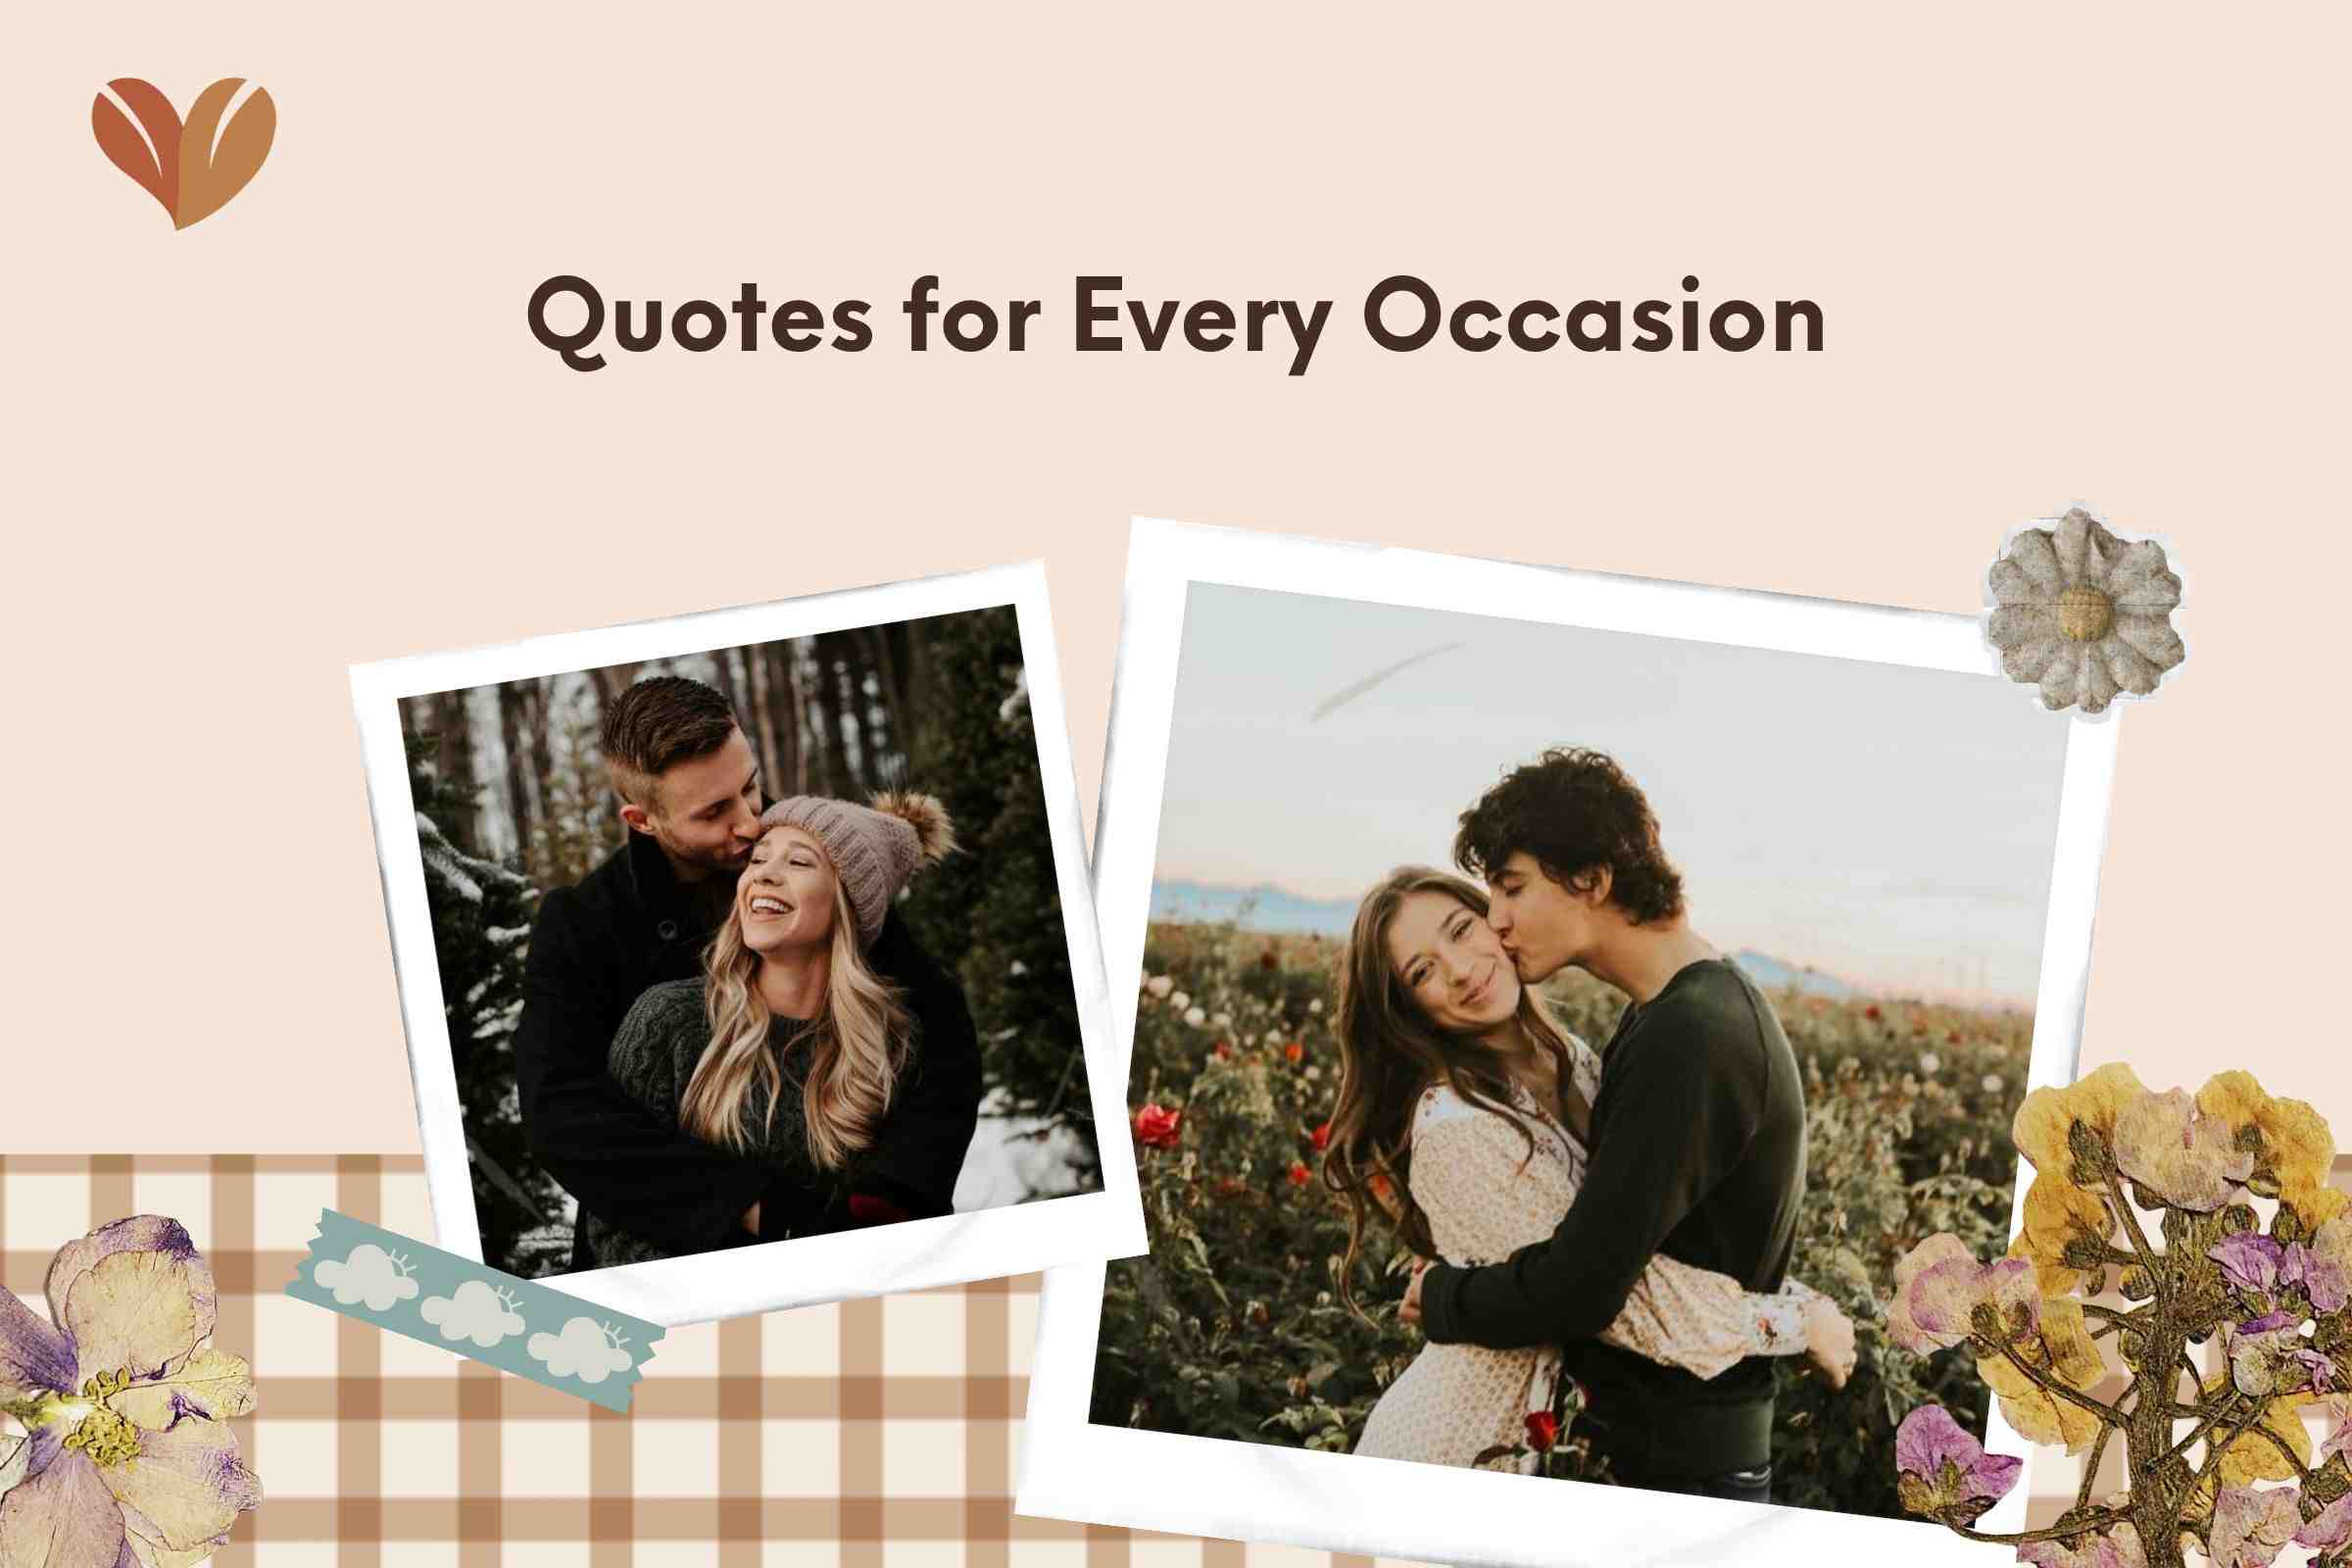 Quotes for Every Occasion